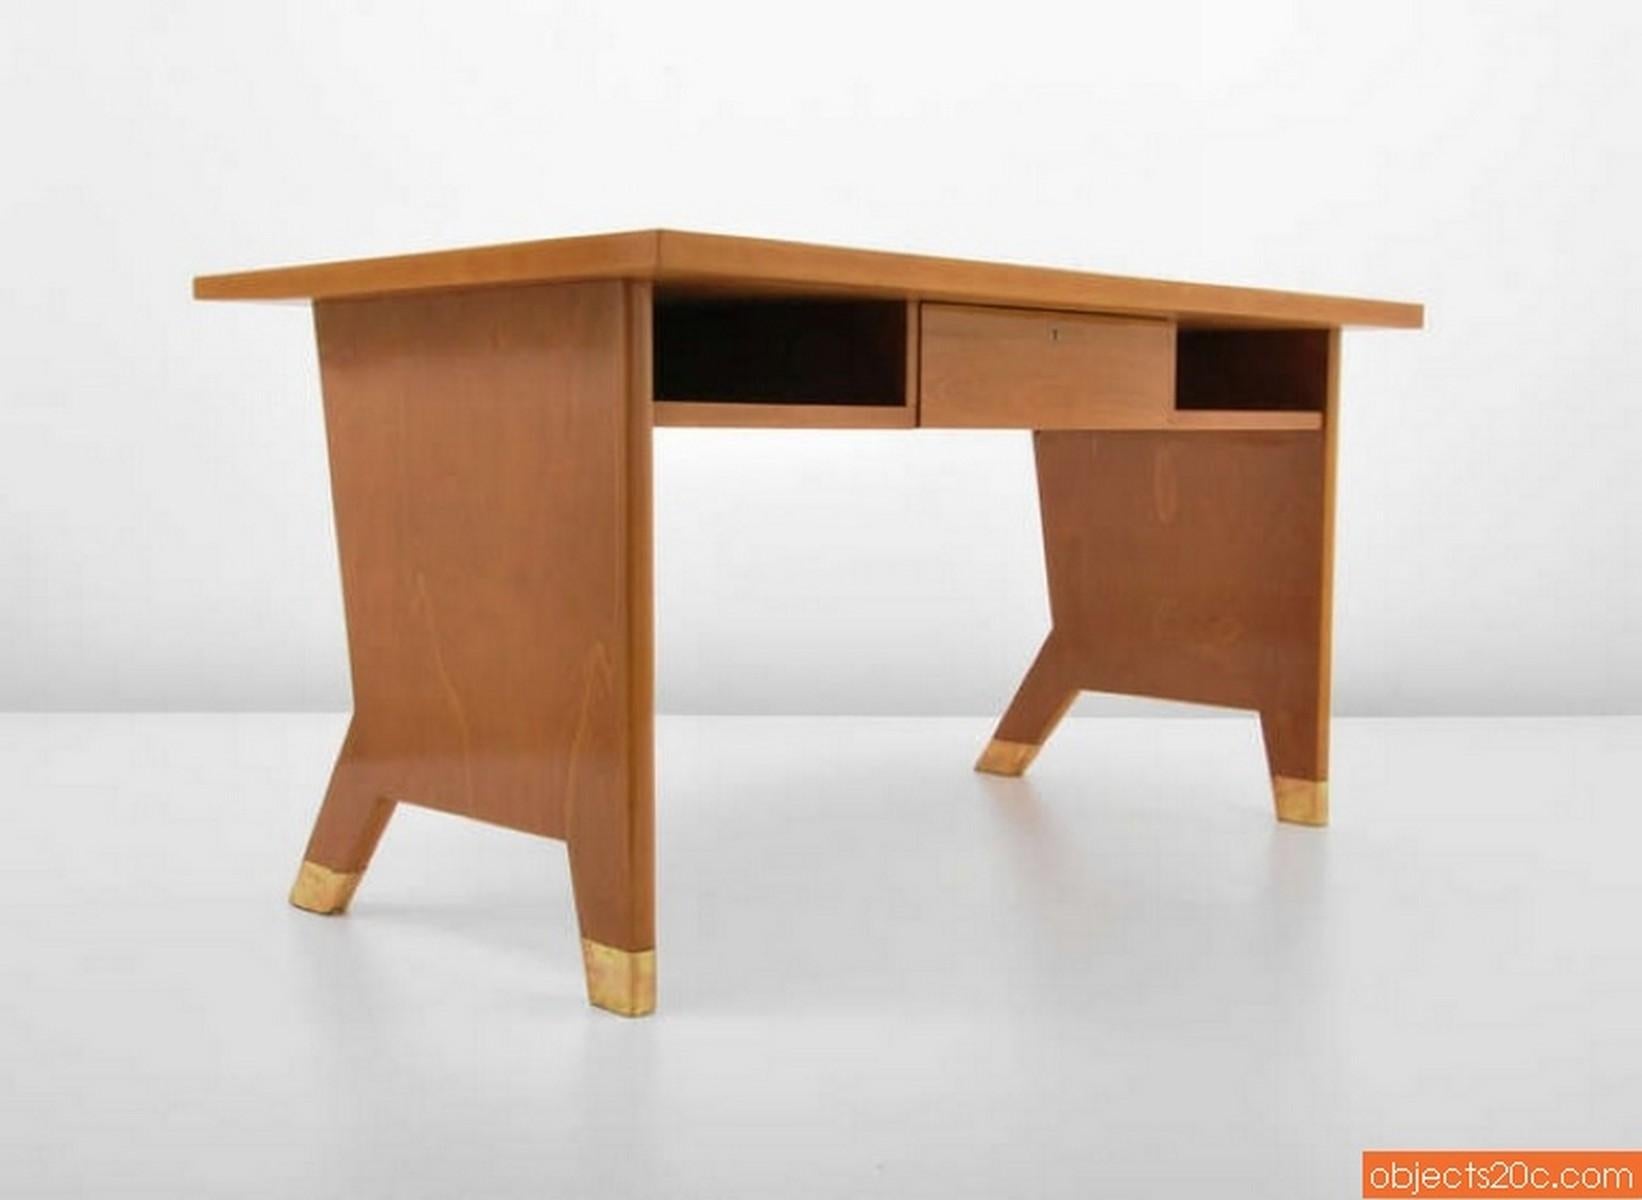 Artist/Designer: Gio Ponti (Italian, 1891-1979)

Additional Information: Desk has splayed front legs, a single drawer, open storage areas and brass sabots. It also has a matching wall shelf. Desk/shelf has a certificate of expertise from the Gio